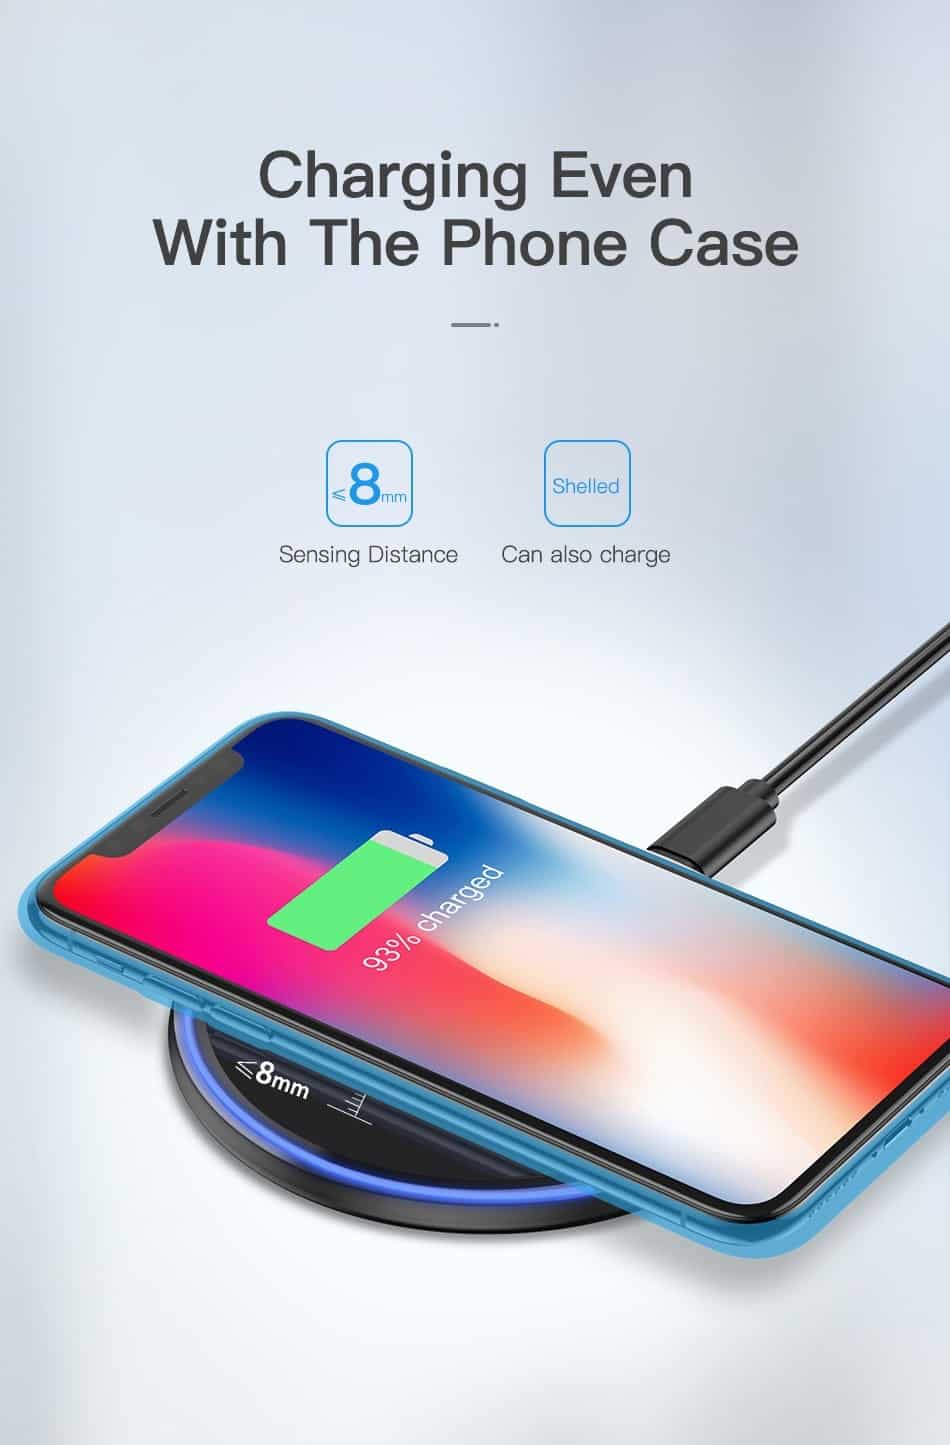 KUULAA 15W Wireless Charger For iPhone X/XS Max XR 8 Plus Mirror Qi Wireless Charging Pad For Samsung S9 S10+ Note 9 8